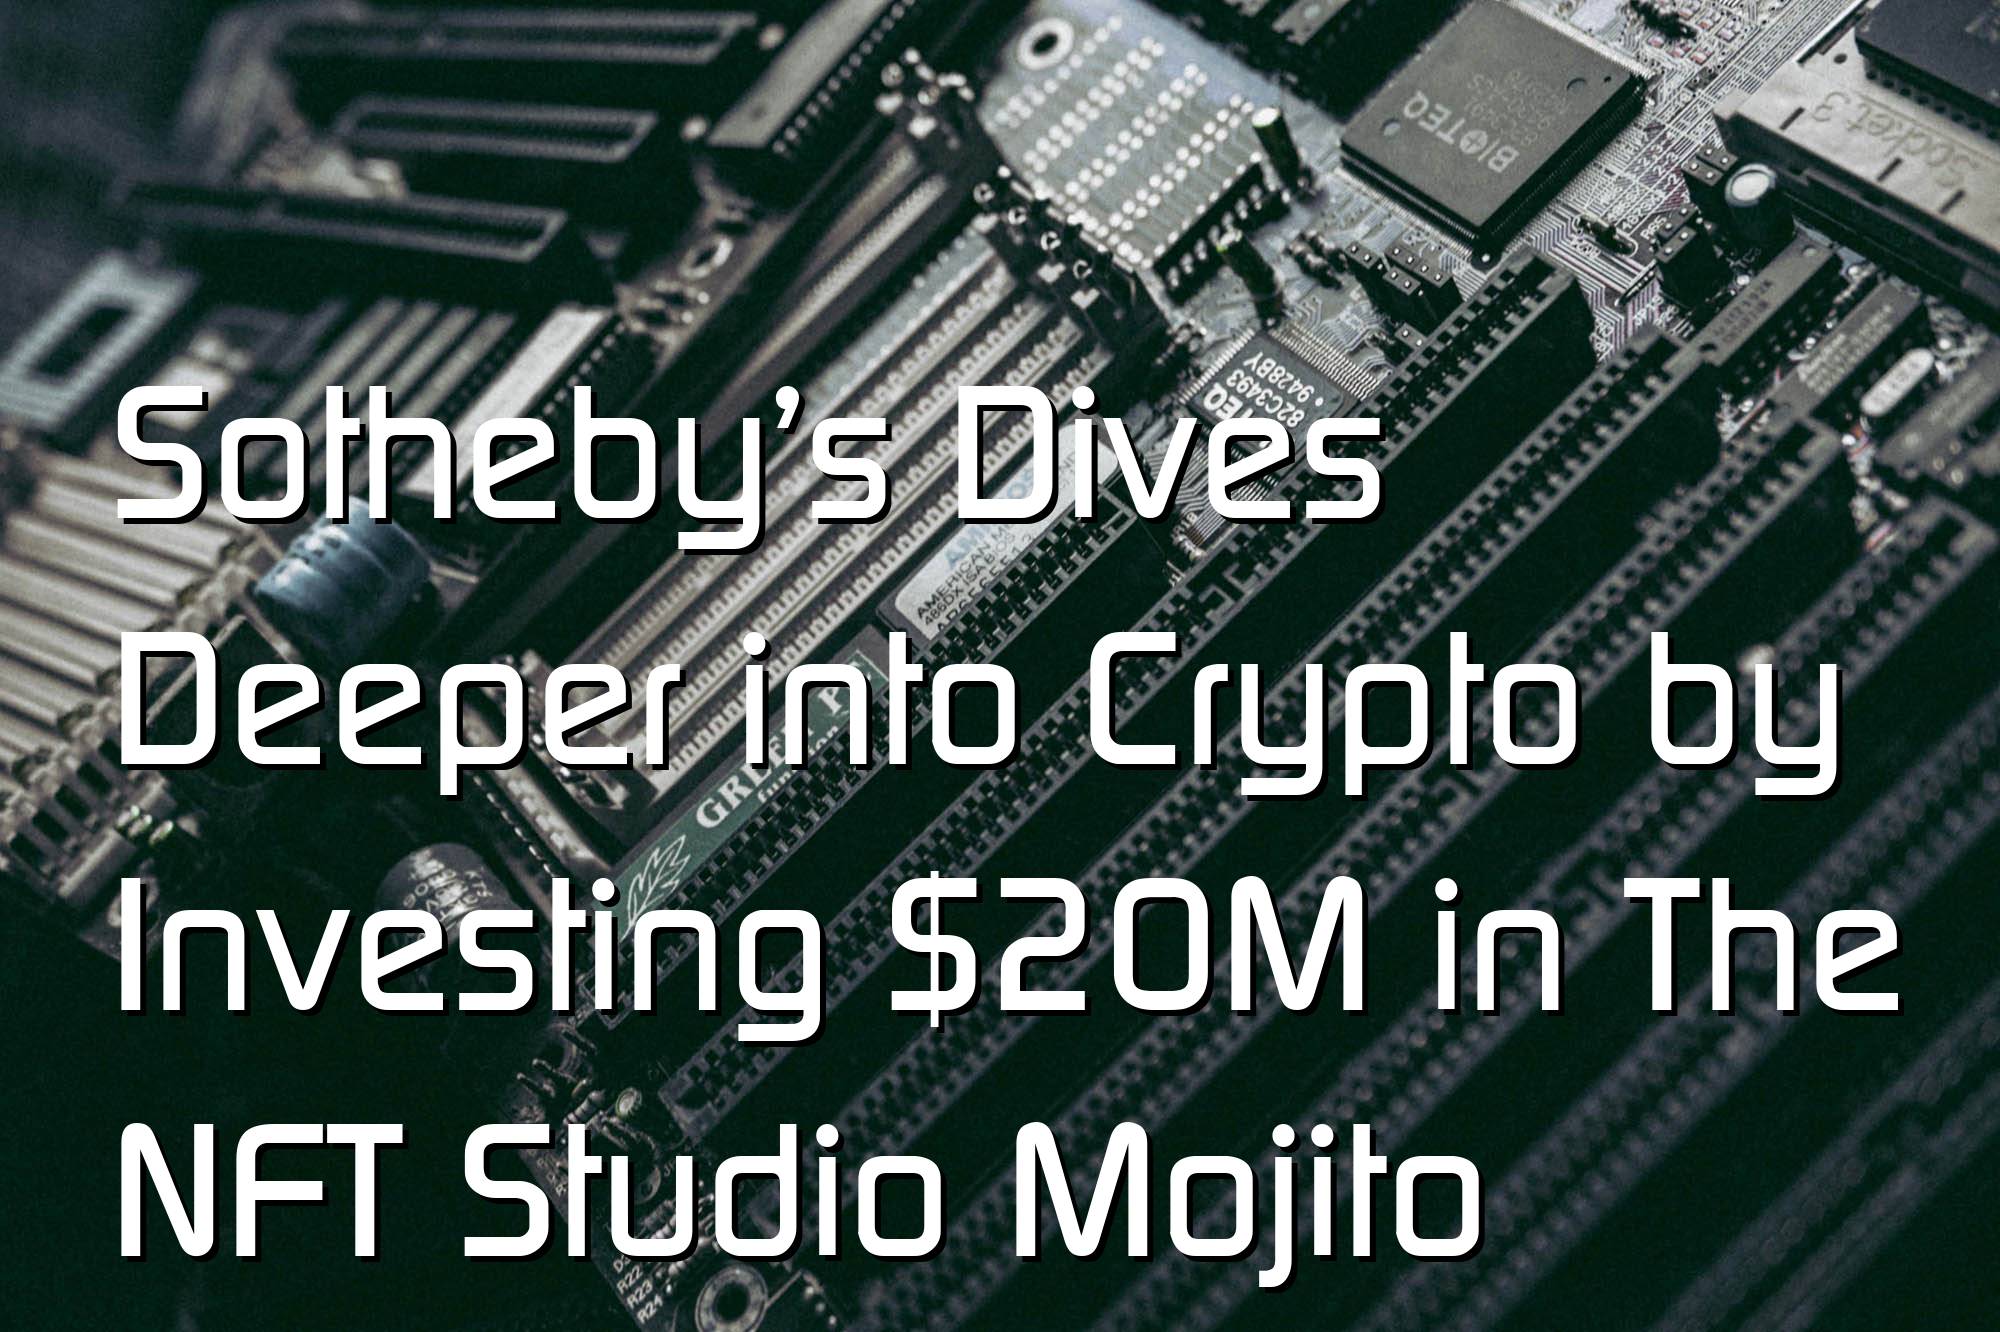 @$60631.77 Sotheby’s Dives Deeper into Crypto by Investing $20M in The NFT Studio Mojito